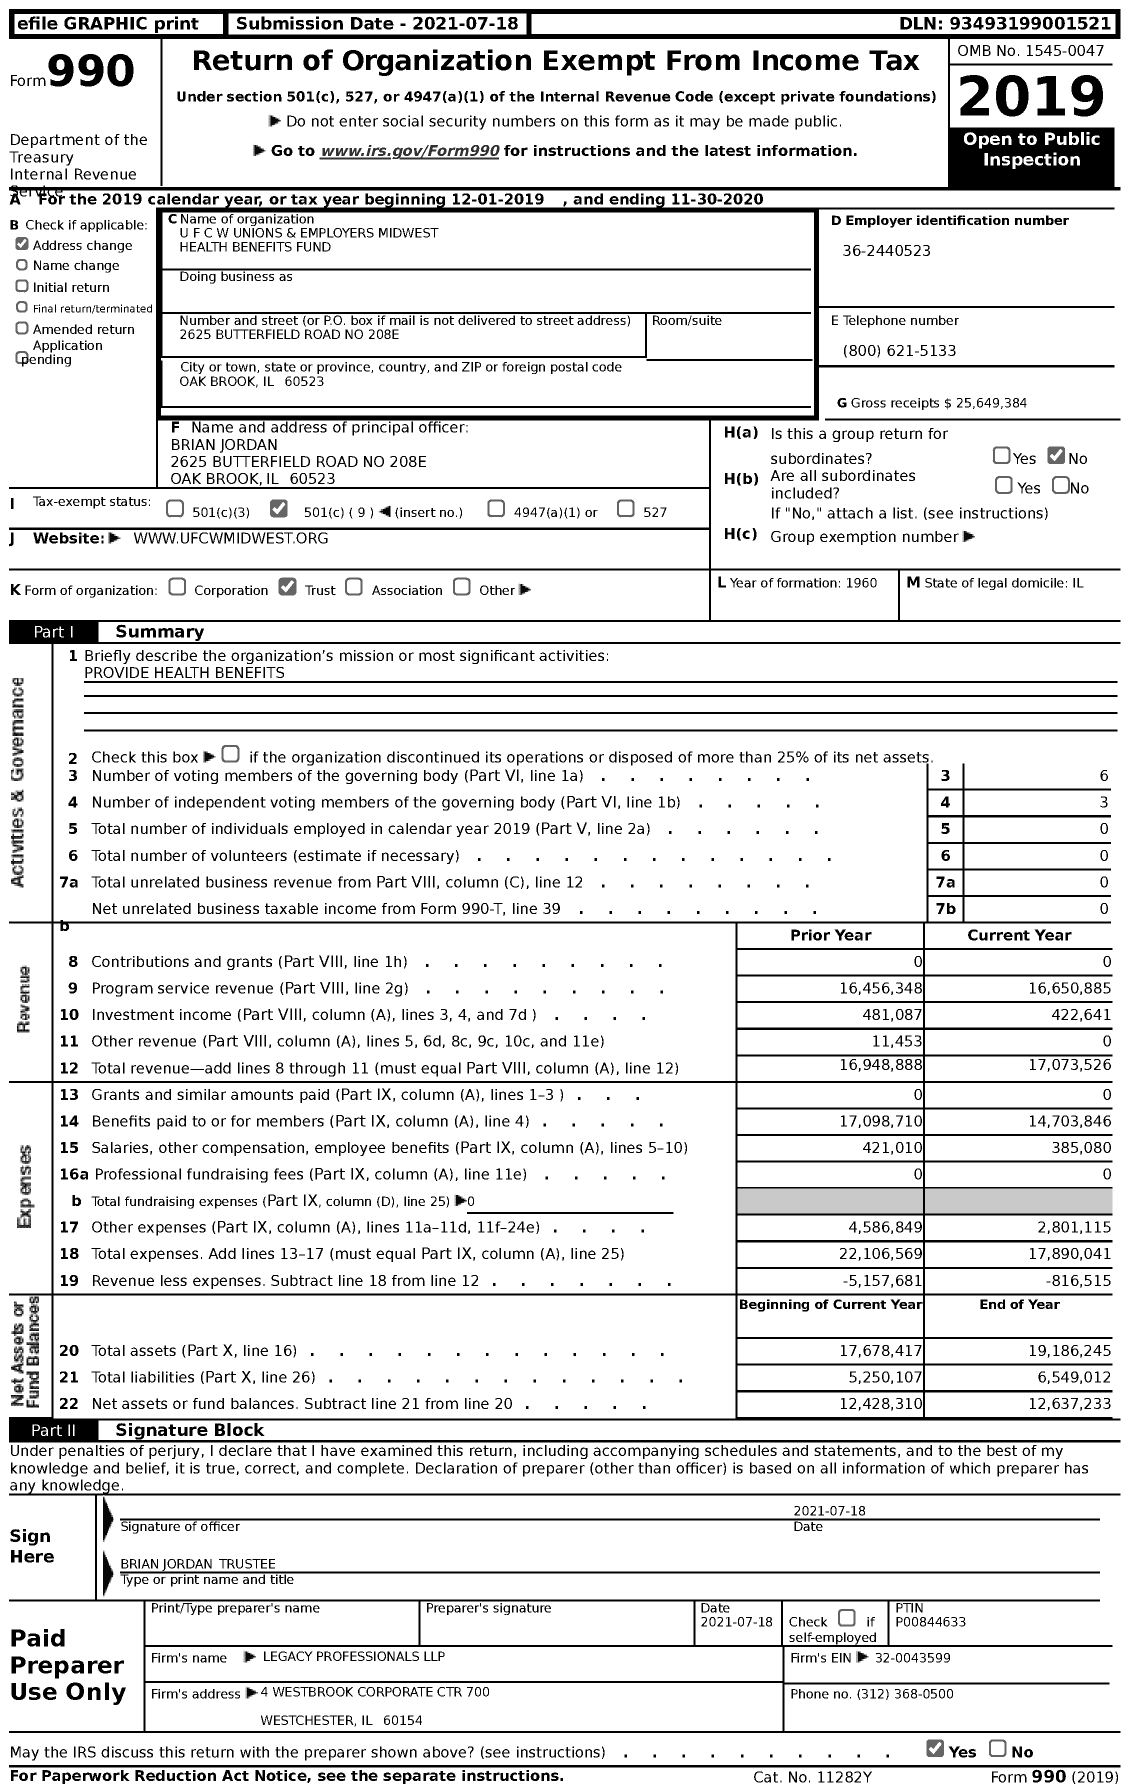 Image of first page of 2019 Form 990 for U F C W Unions and Employers Midwest Health Benefits Fund